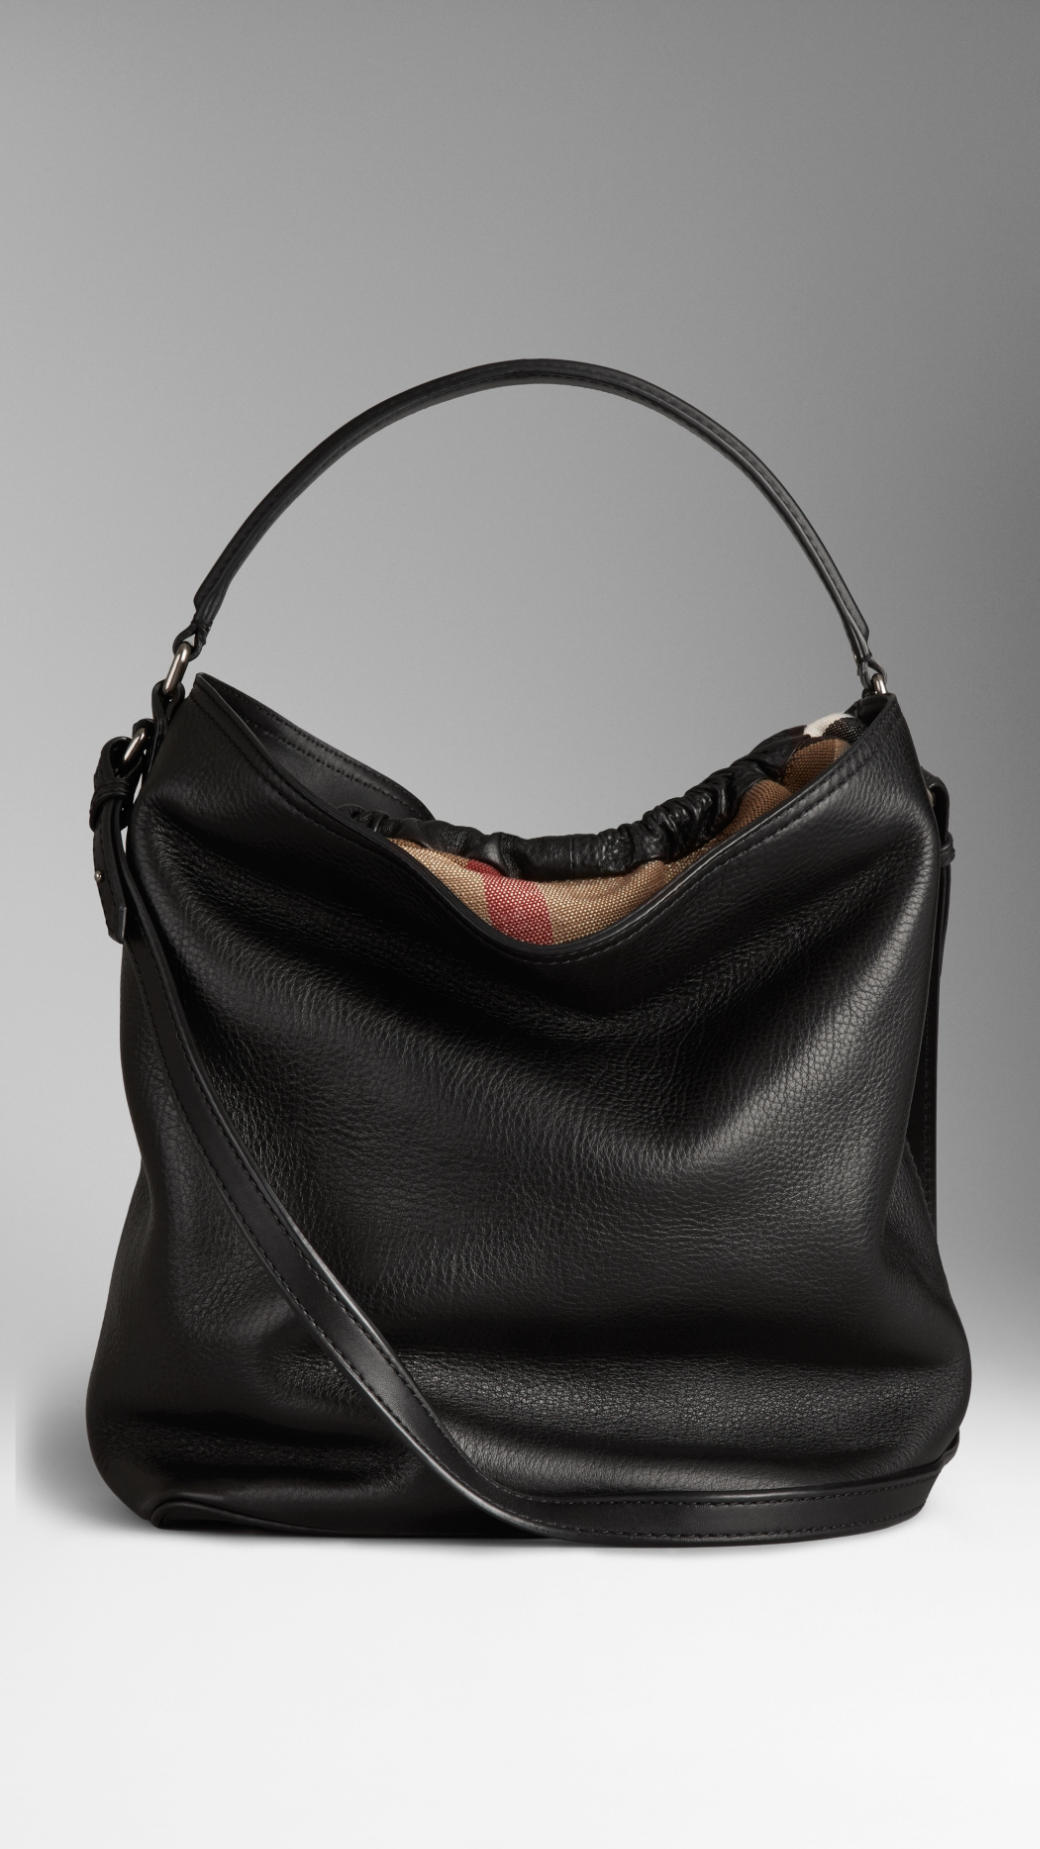 Burberry The Medium Ashby Leather Hobo Bag in Black - Lyst